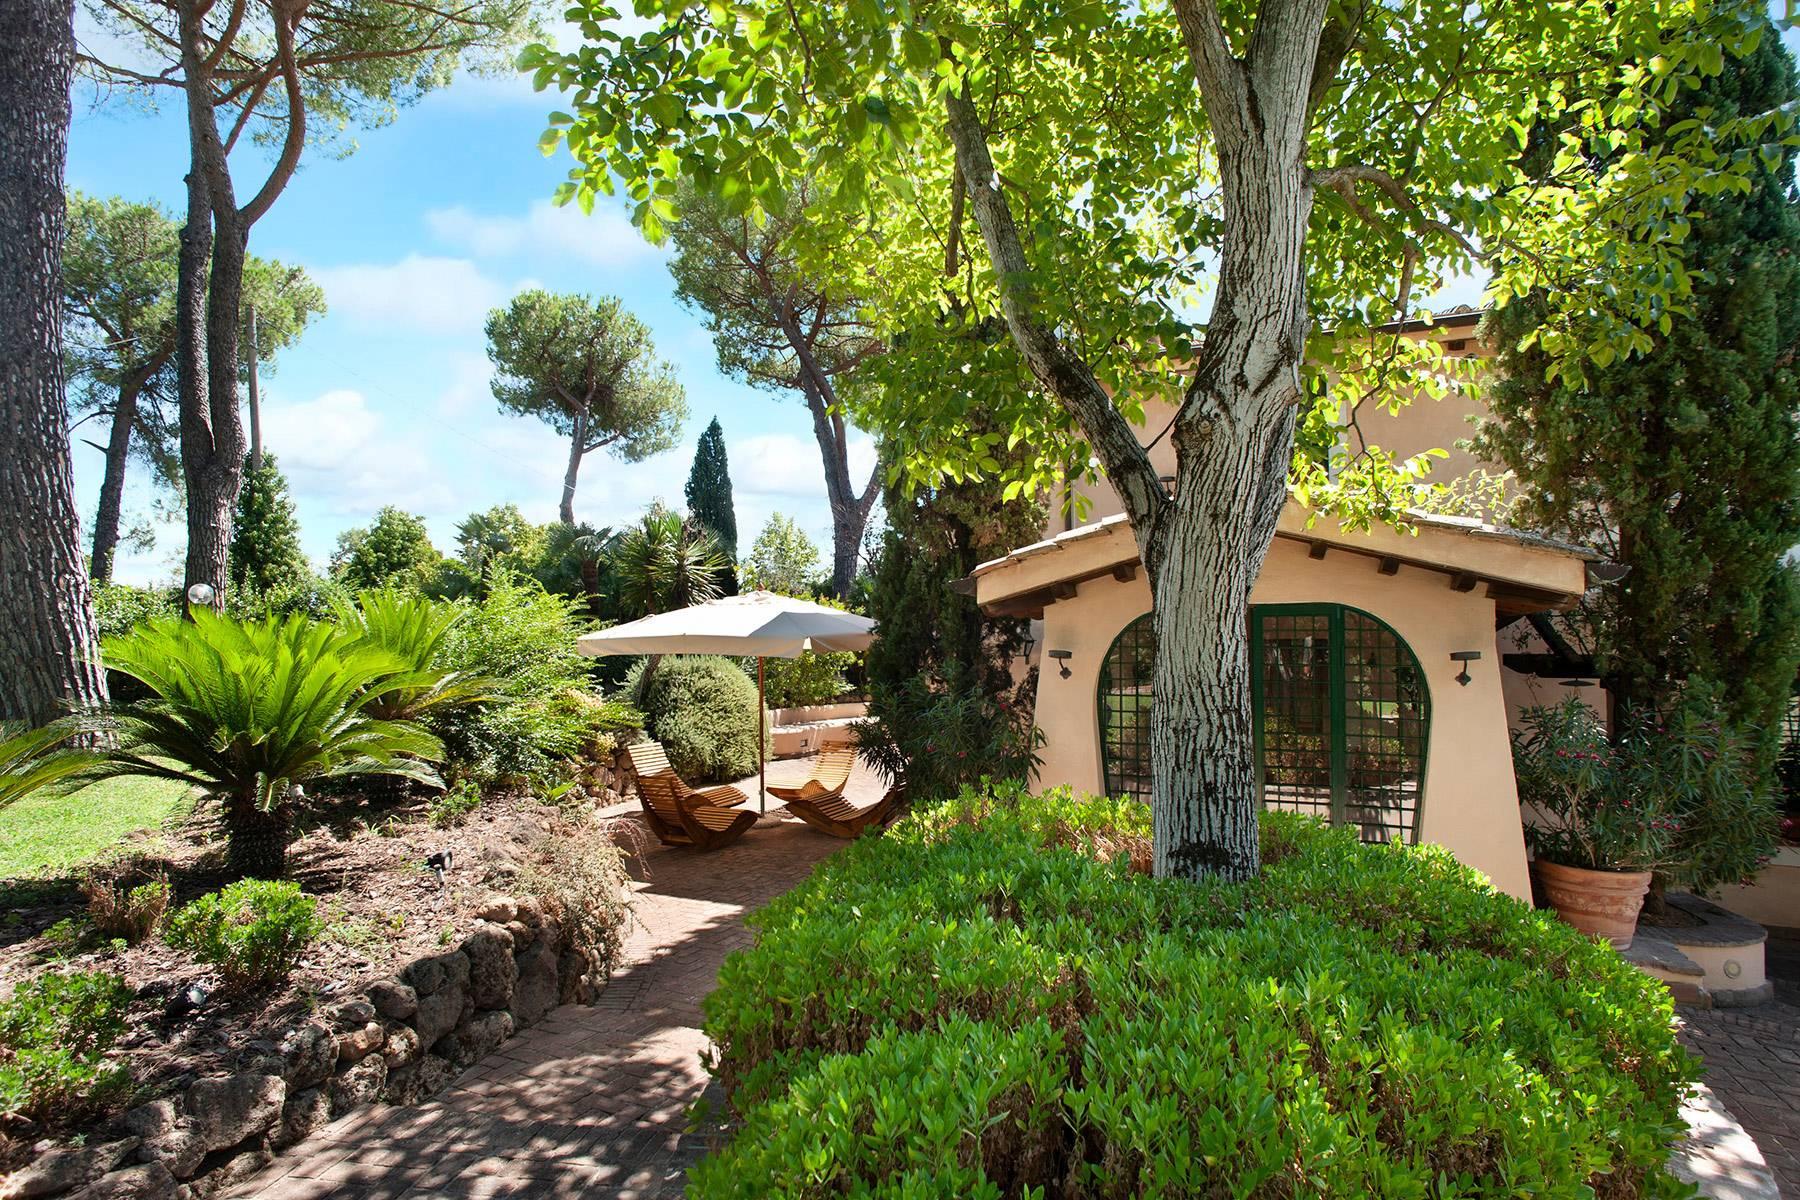 Villa Nayara - Lovely mansion with swimming pool 30 minutes from Rome - 14